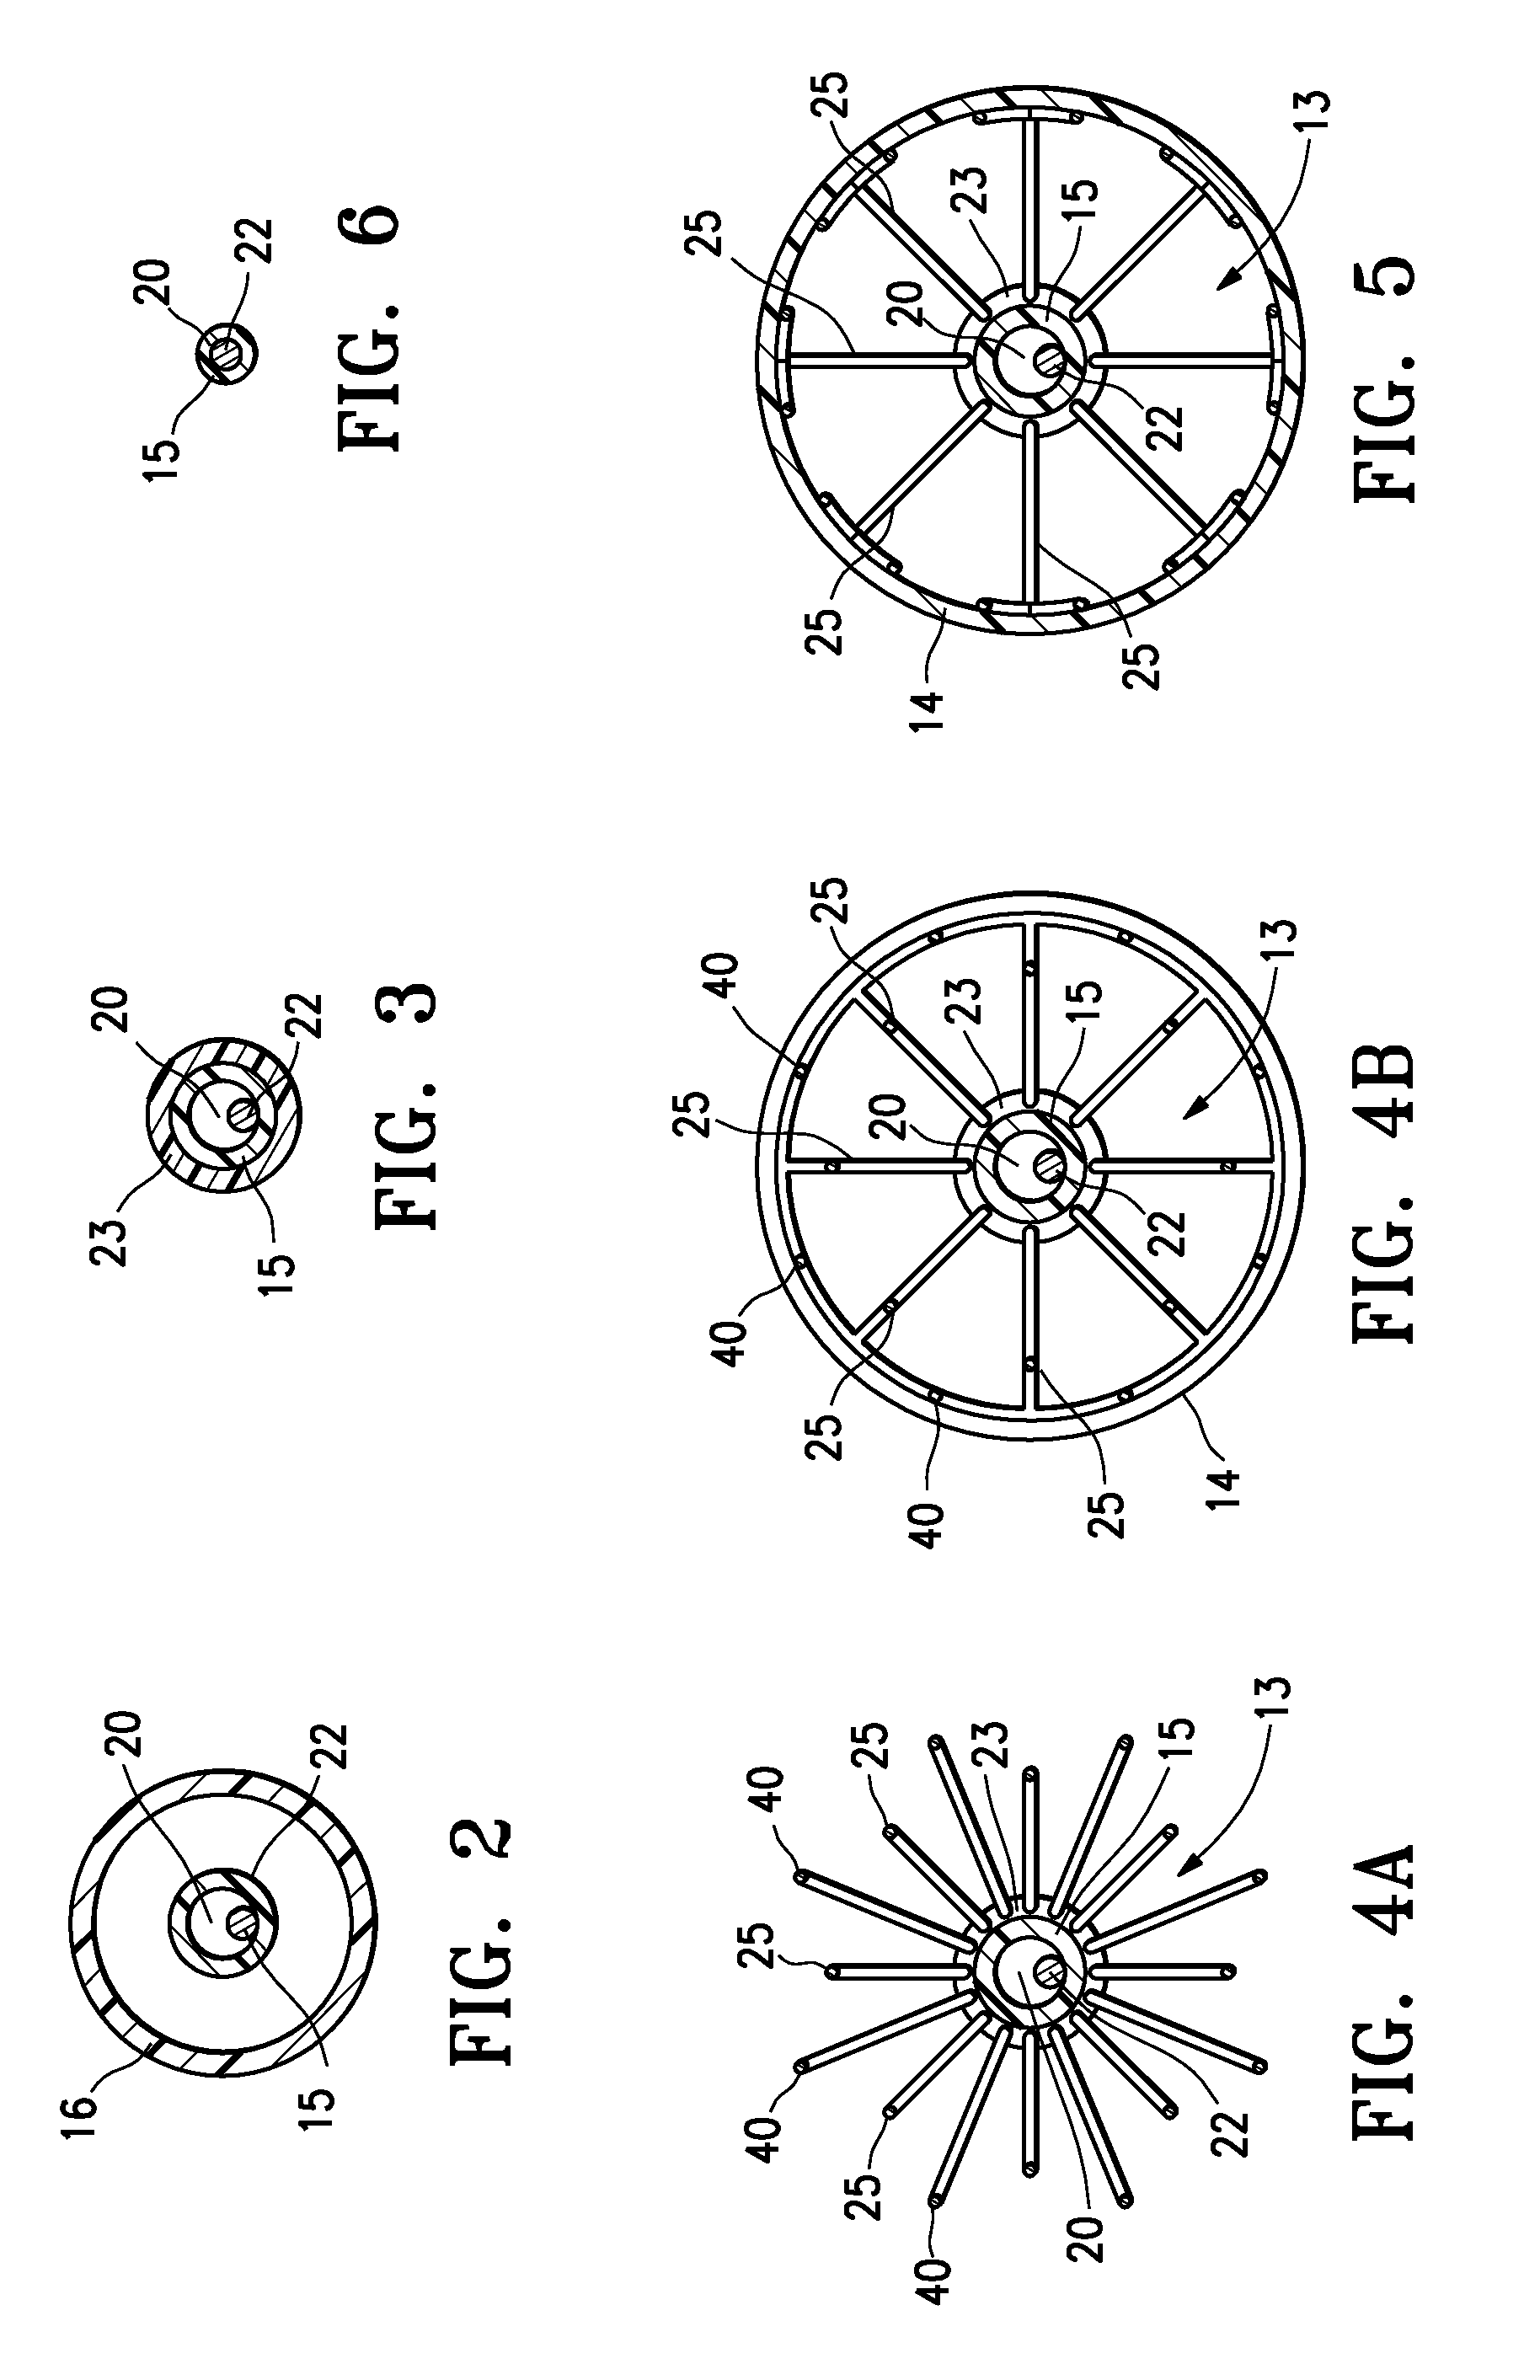 Intravascular medical device having a readily collapsible covered frame